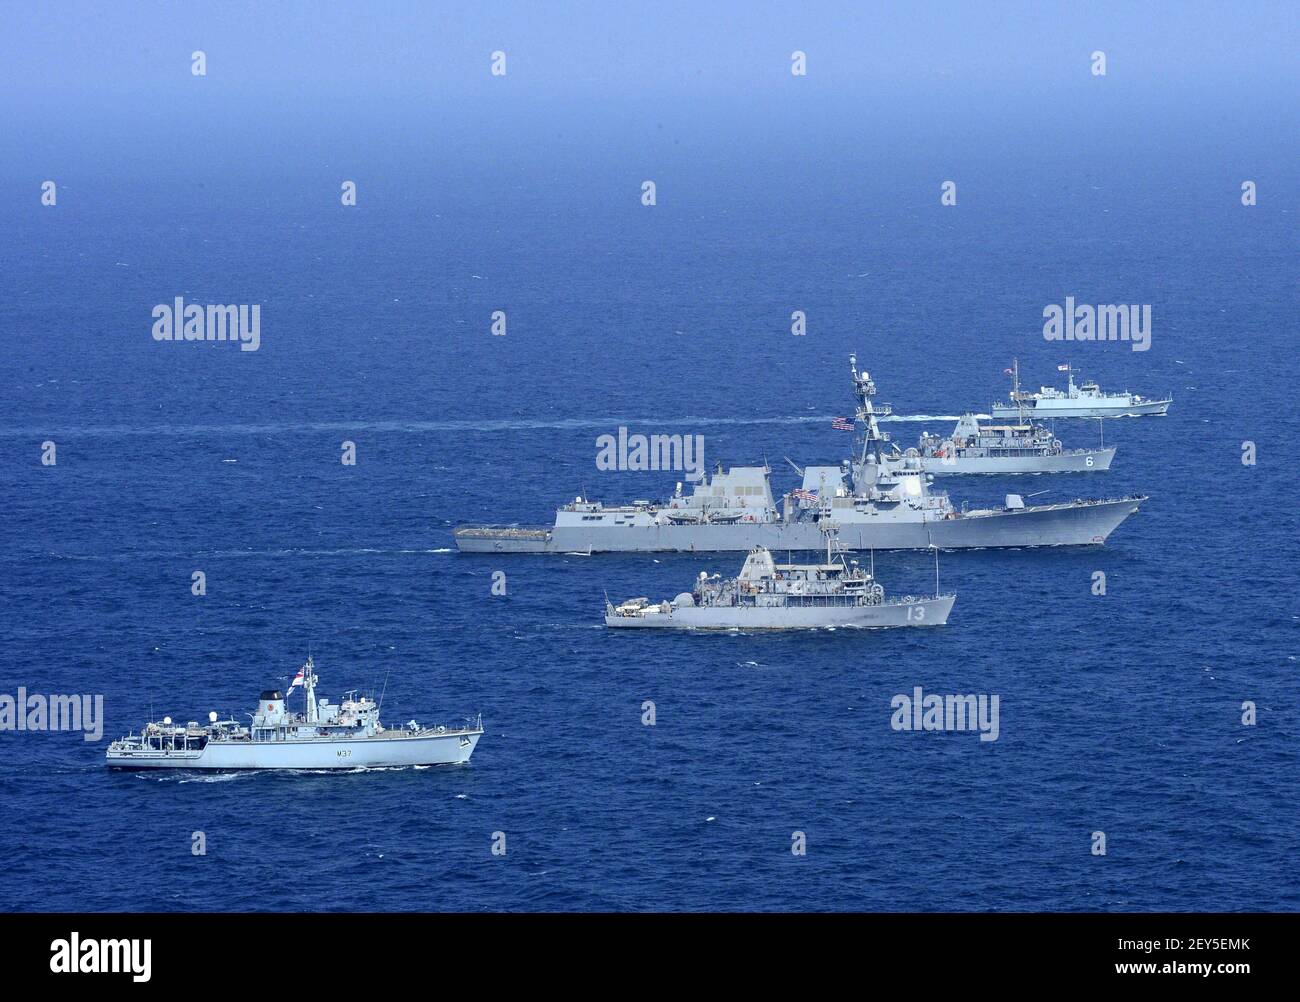 ARABIAN GULF (Oct. 31, 2014) The Arleigh Burke-class guided-missile destroyer USS Sterett (DDG 104), center, participates in International Mine-countermeasures Exercise (IMCMEX) with the mine countermeasures ships USS Devastator (MCM 6) and USS Dextrous (MCM 13) and the Royal Navy mine-countermeasure vessels HMS Penzance (M 106), top, and HMS Chiddingfold (M 37). Sterett is deployed as part of the Carl Vinson Carrier Strike Group supporting maritime security operations, strike operations in Iraq and Syria as directed and theater security cooperation efforts in the U.S. 5th Fleet area of respon Stock Photo